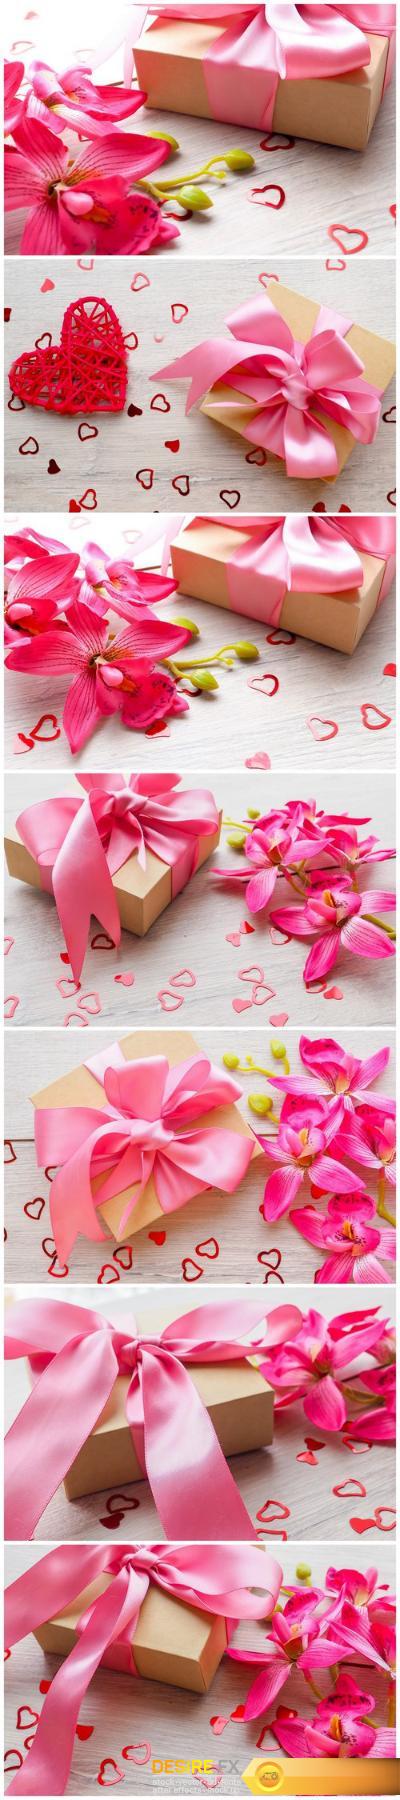 Gentle sweet composition for Valentines day, birthday, wedding in pink and red colors - Set of 7xUHQ JPEG Professional Stock Images